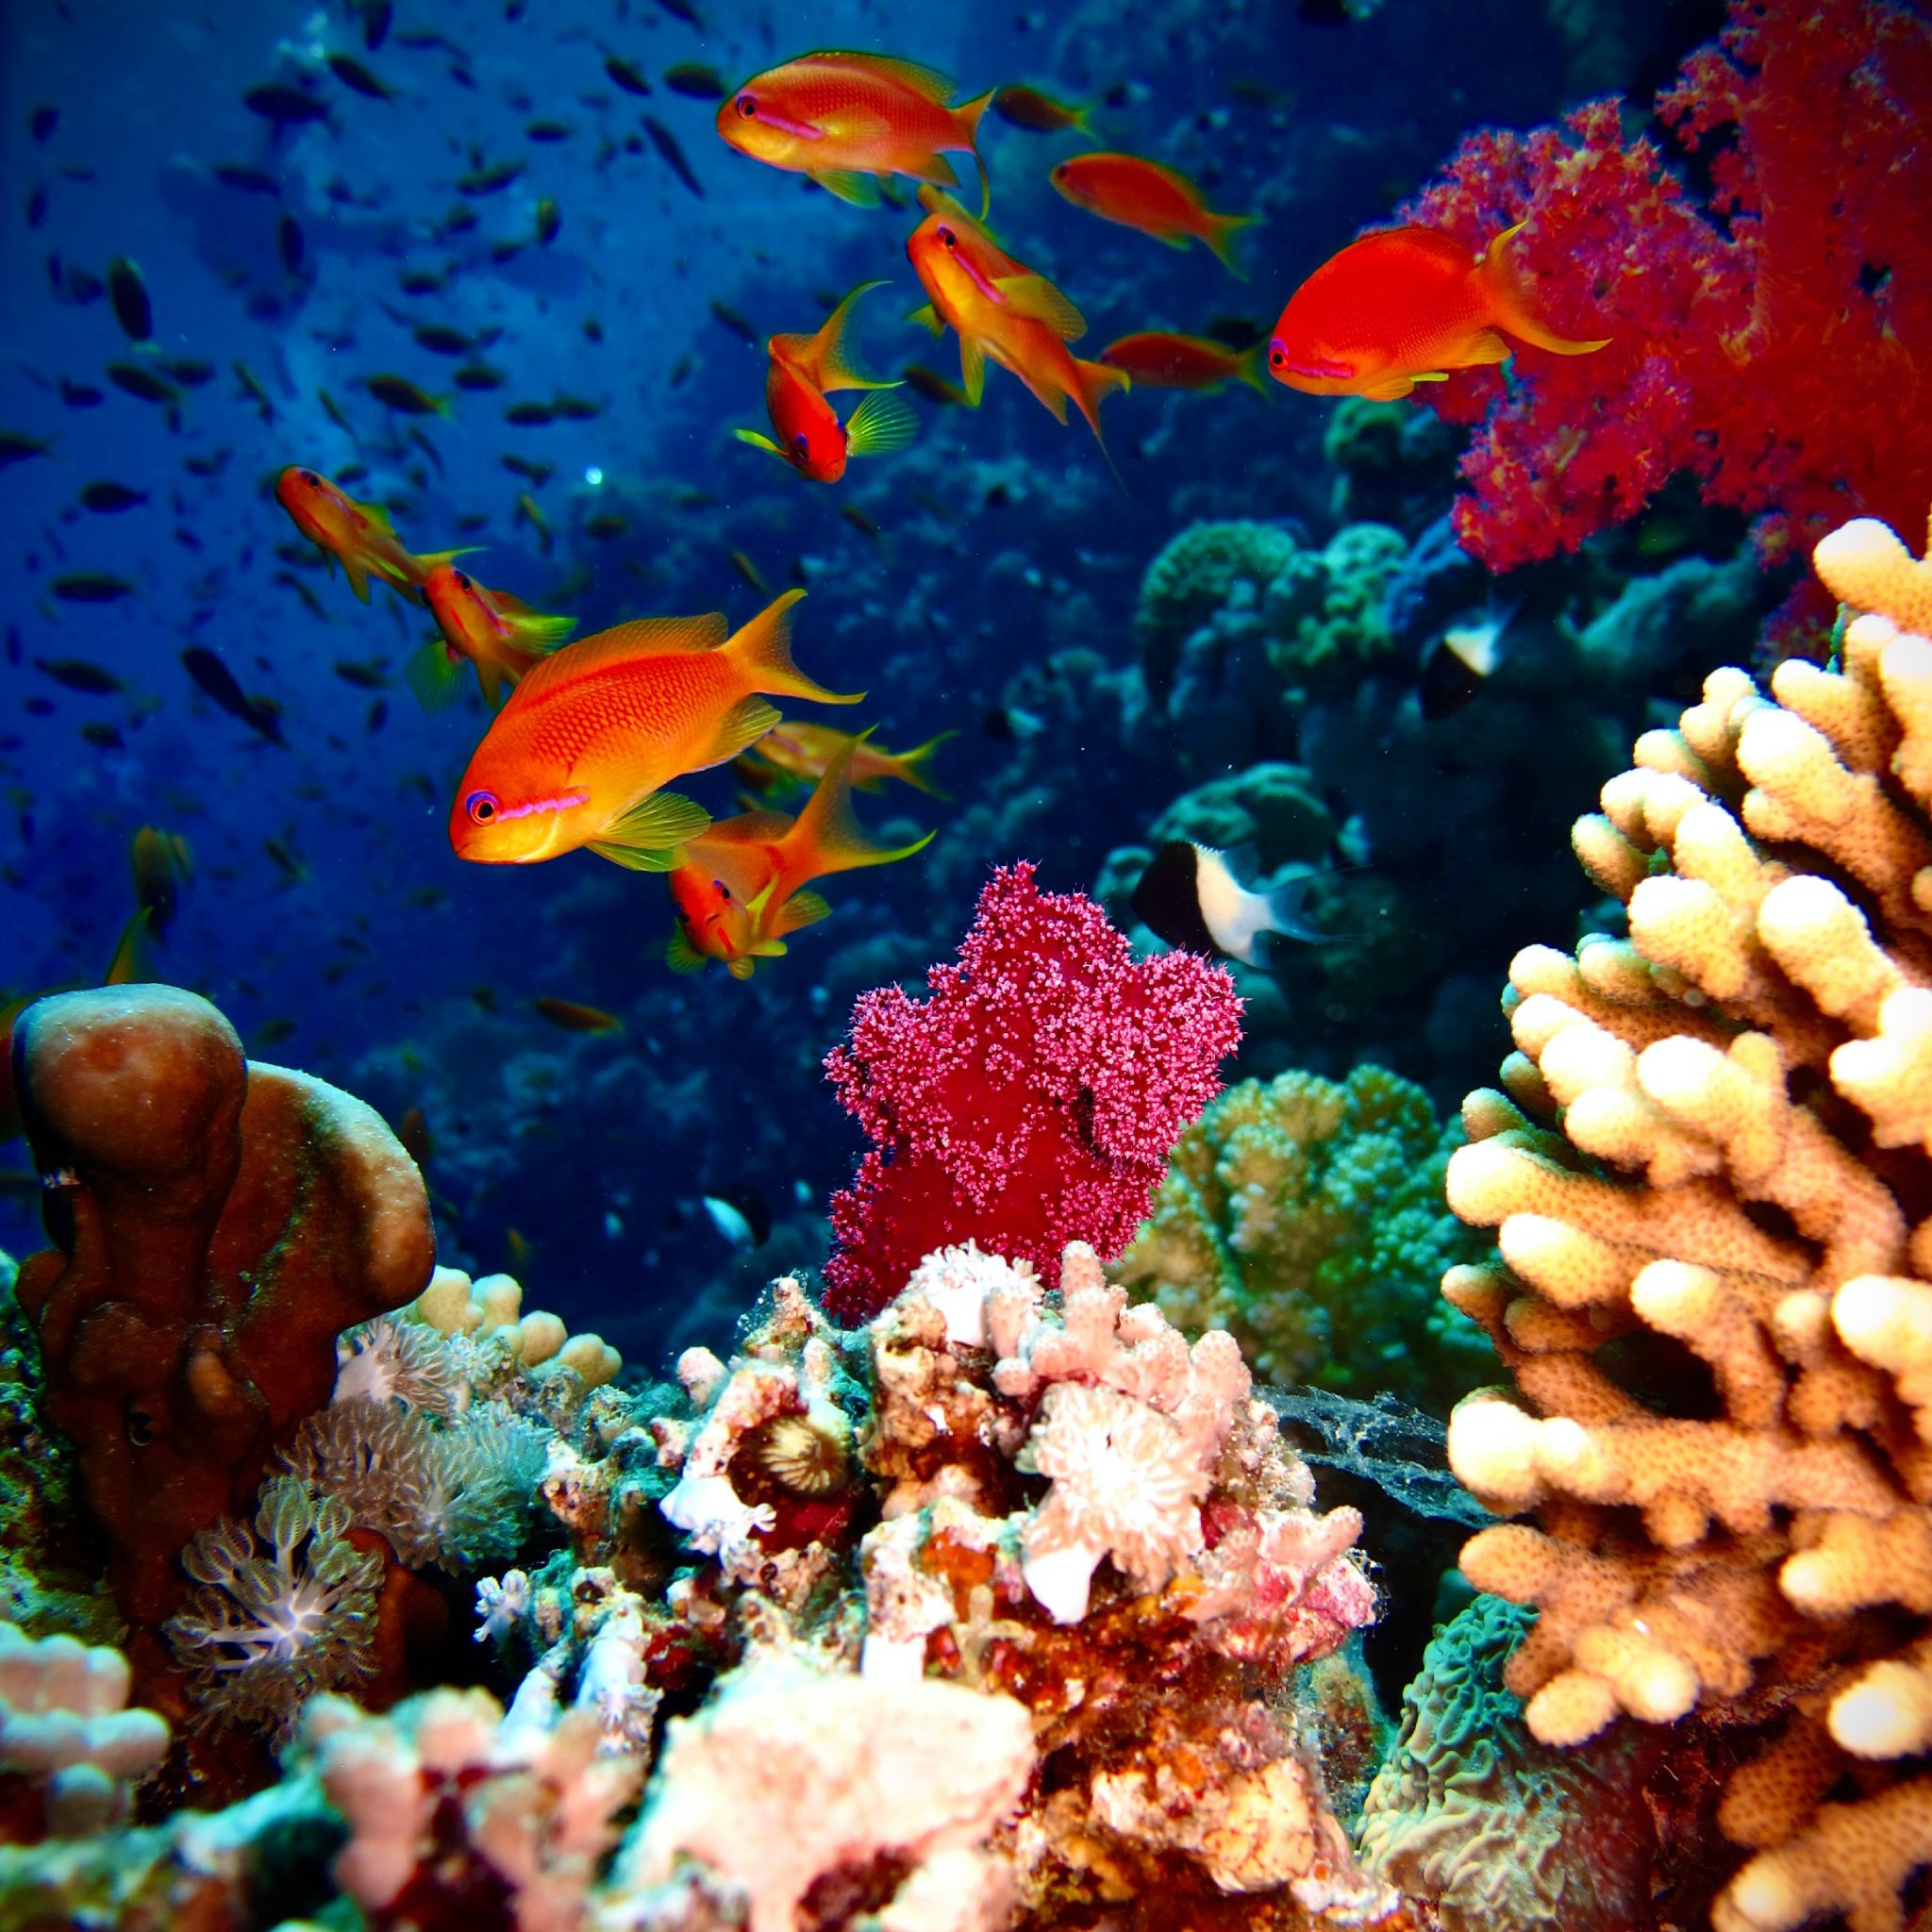 Best diving spots in the world with orange fishes and corals in the sea.